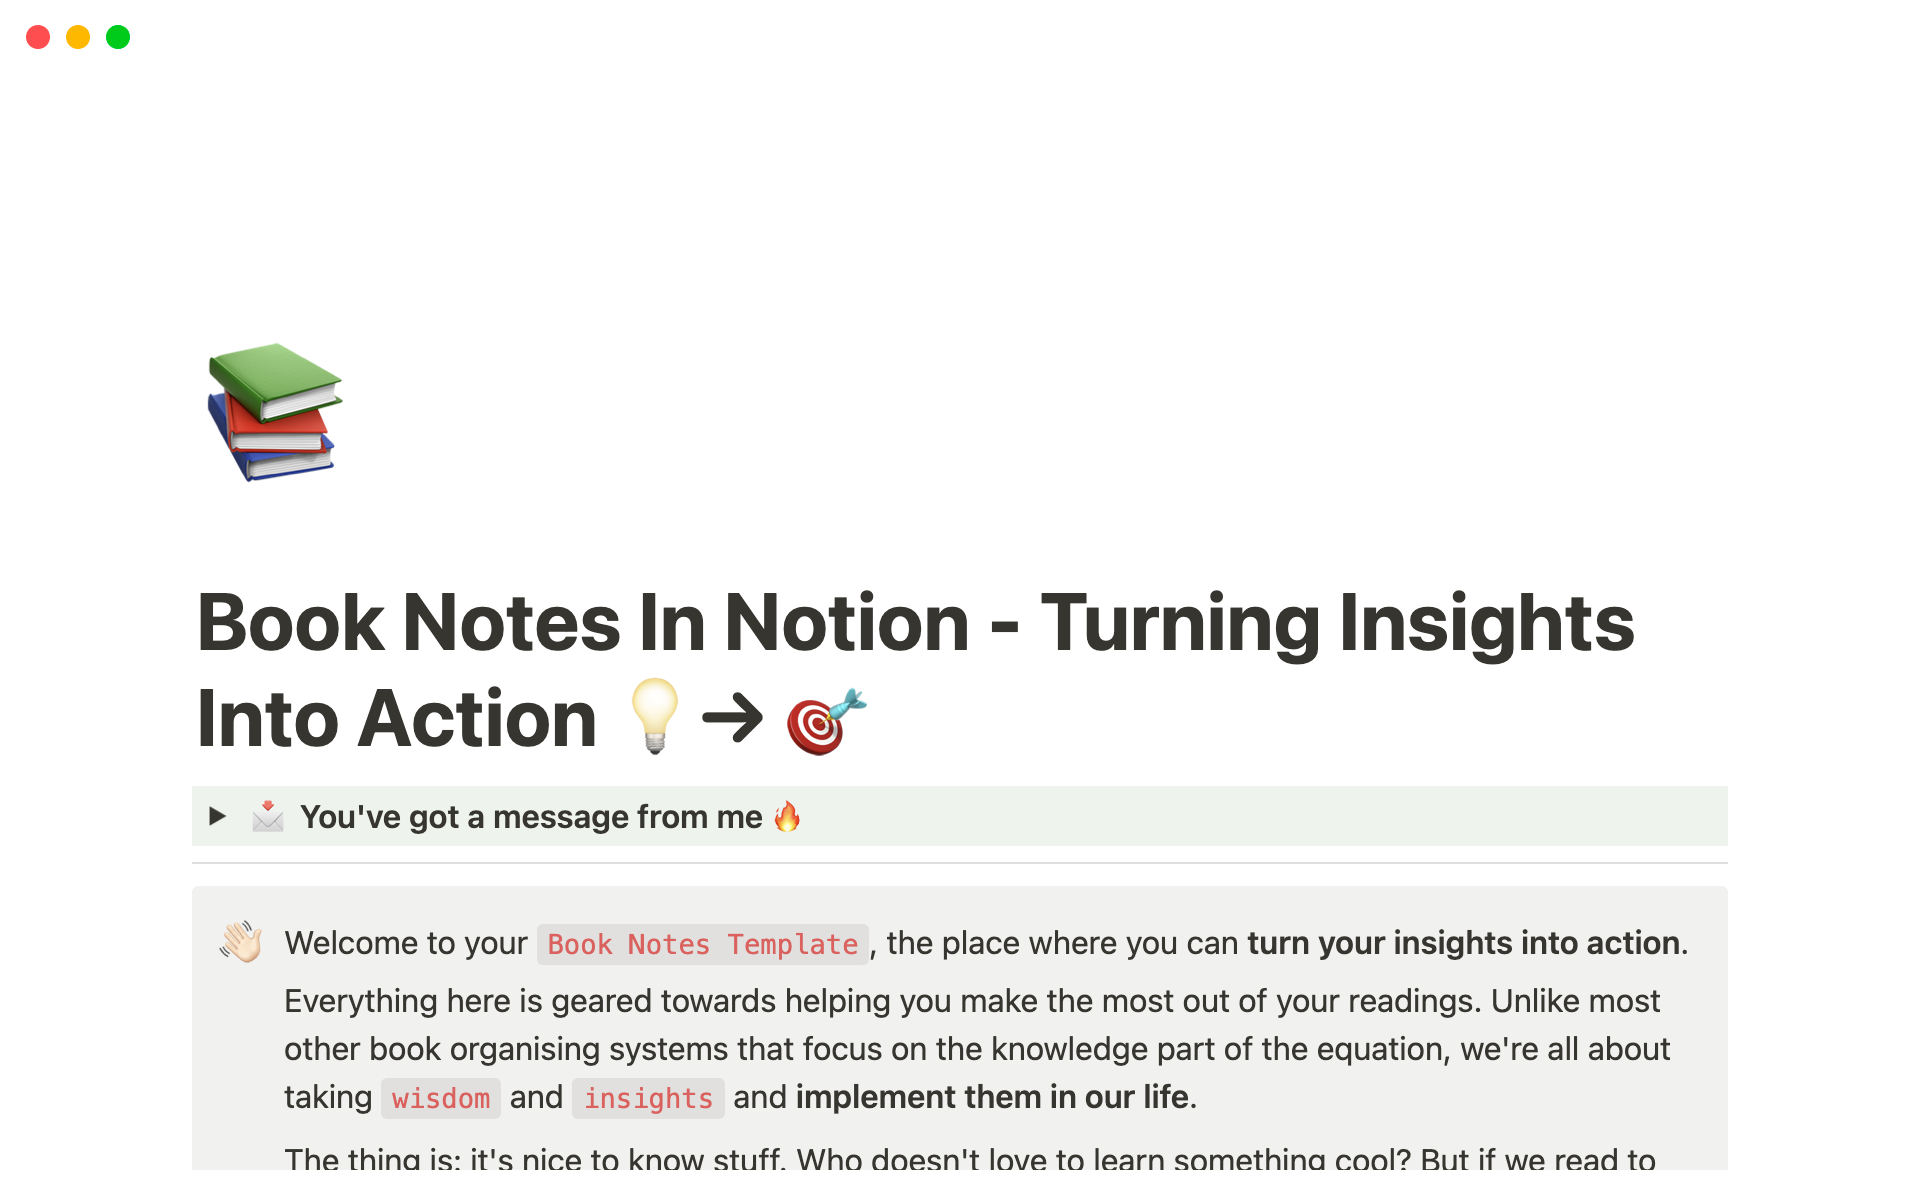 A template preview for Book Notes for Notion